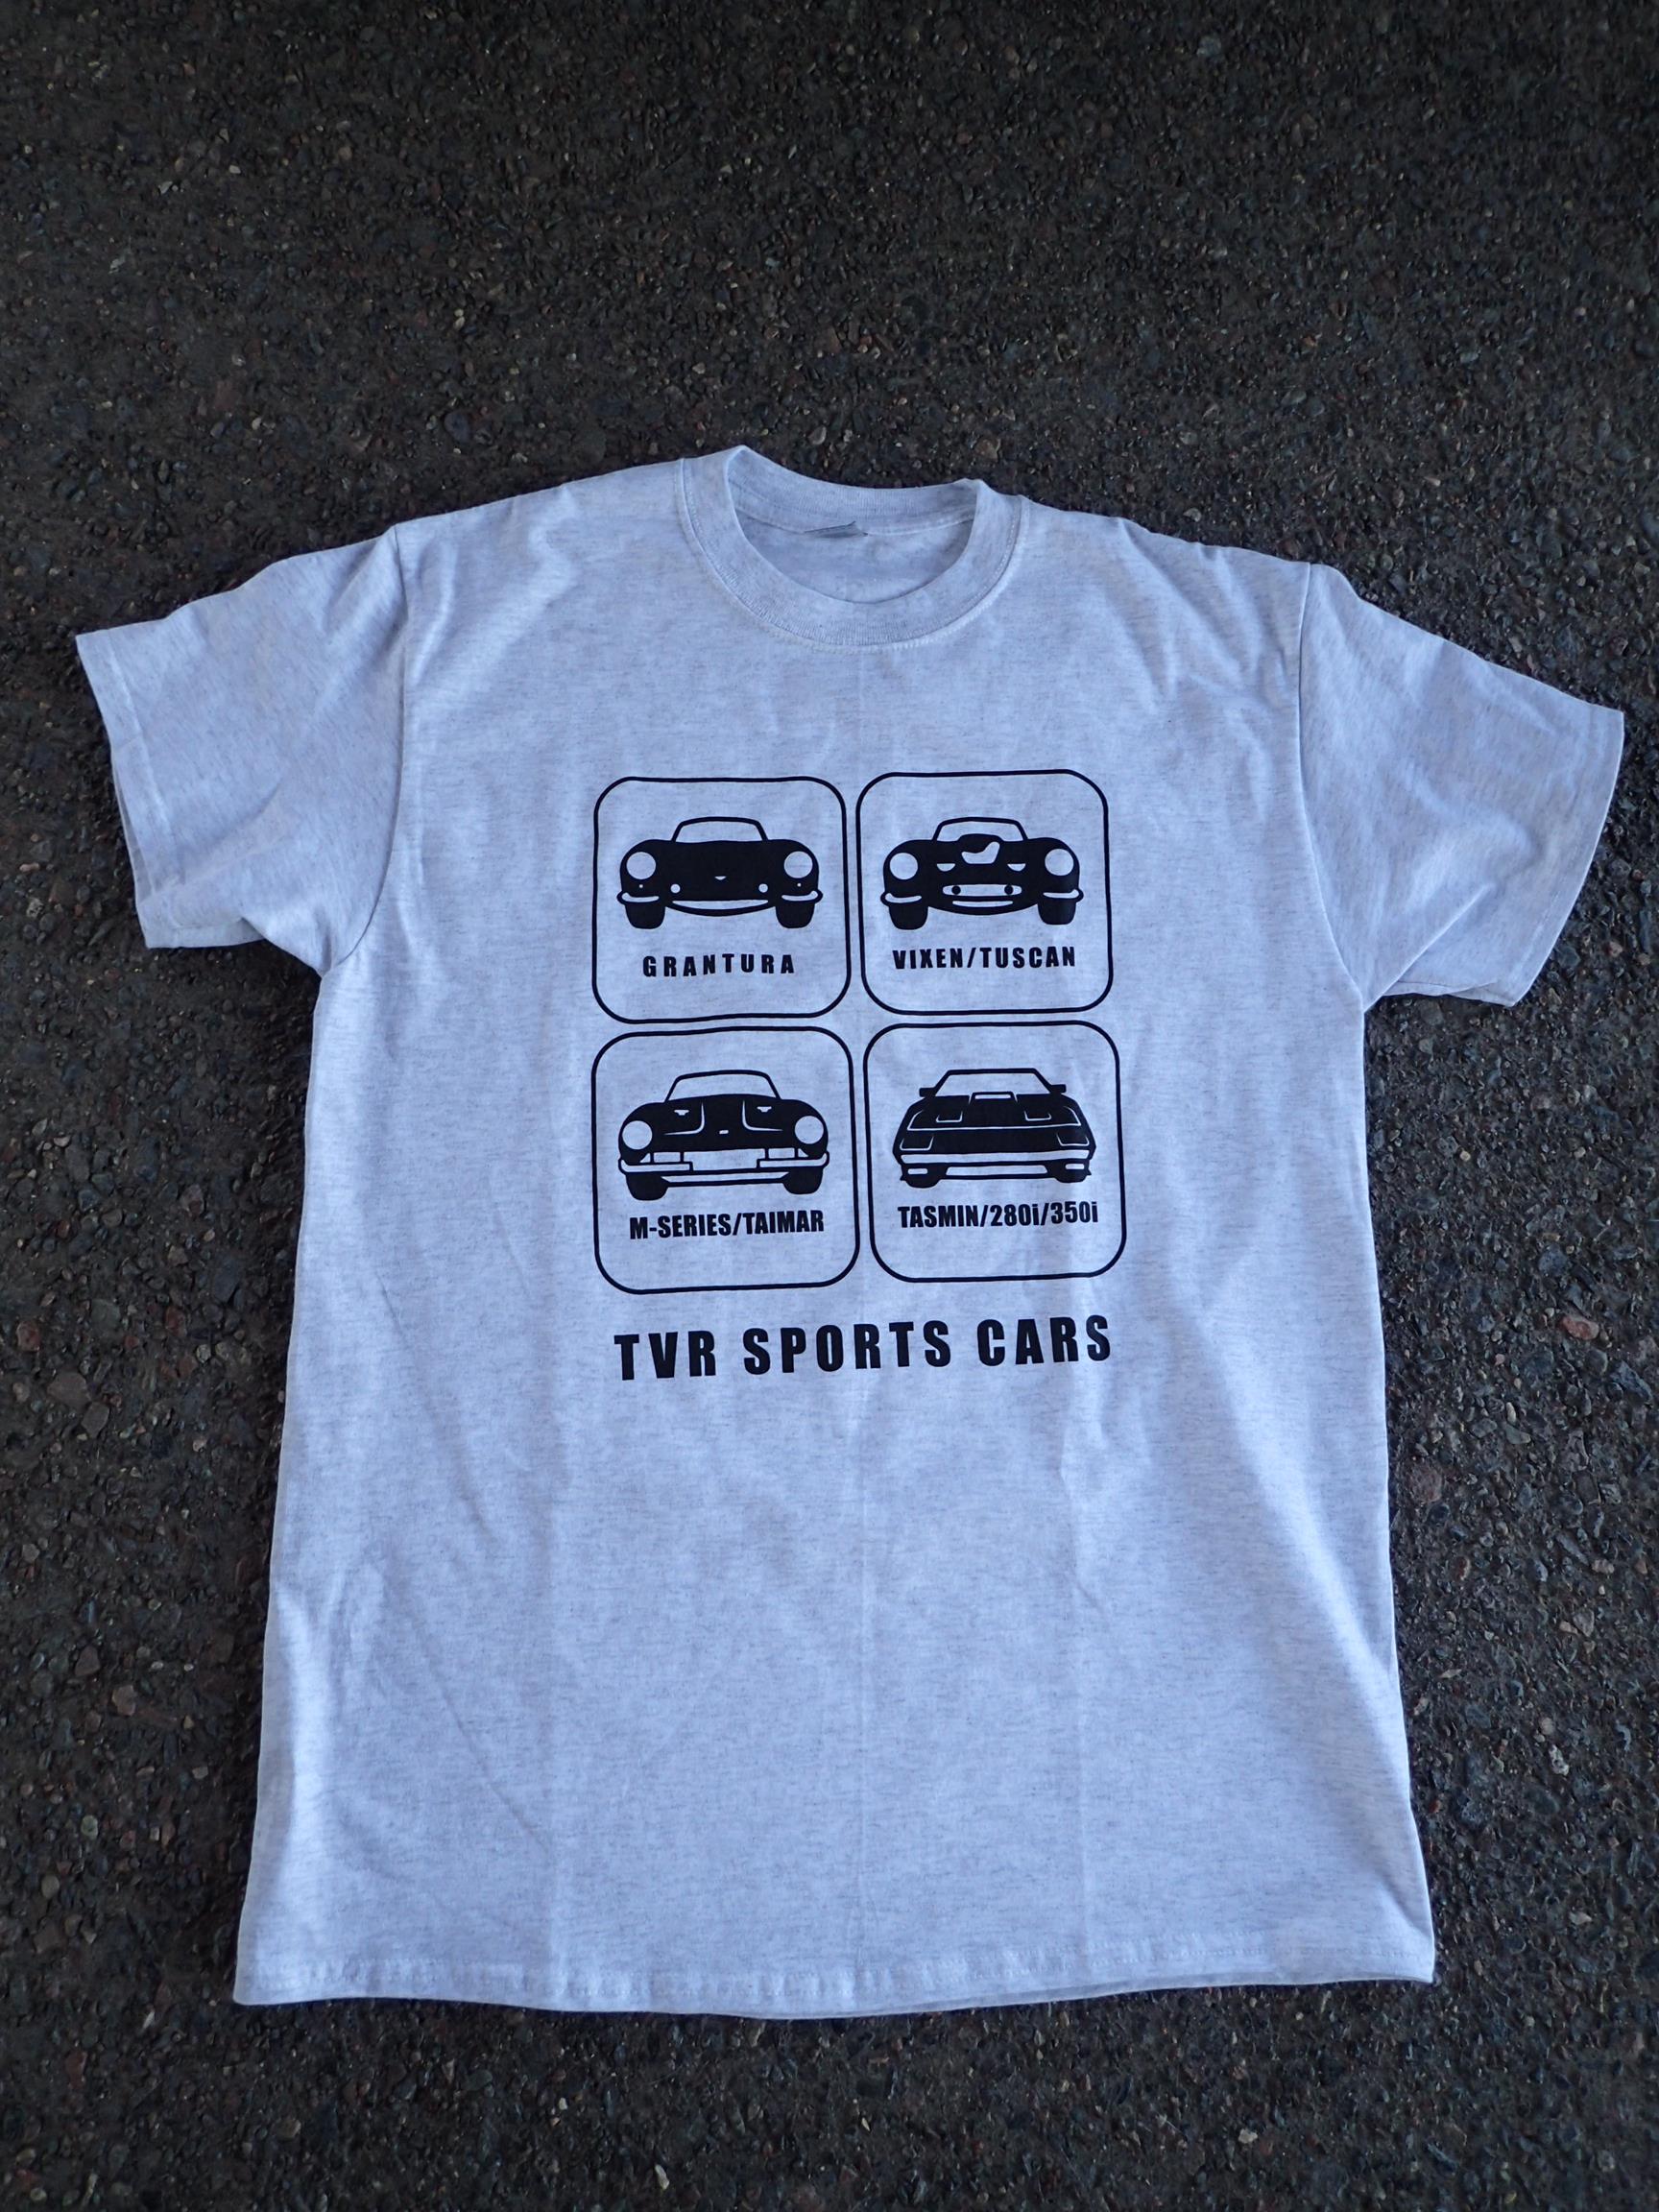 TVR Sports Cars Tee - Gray - Small